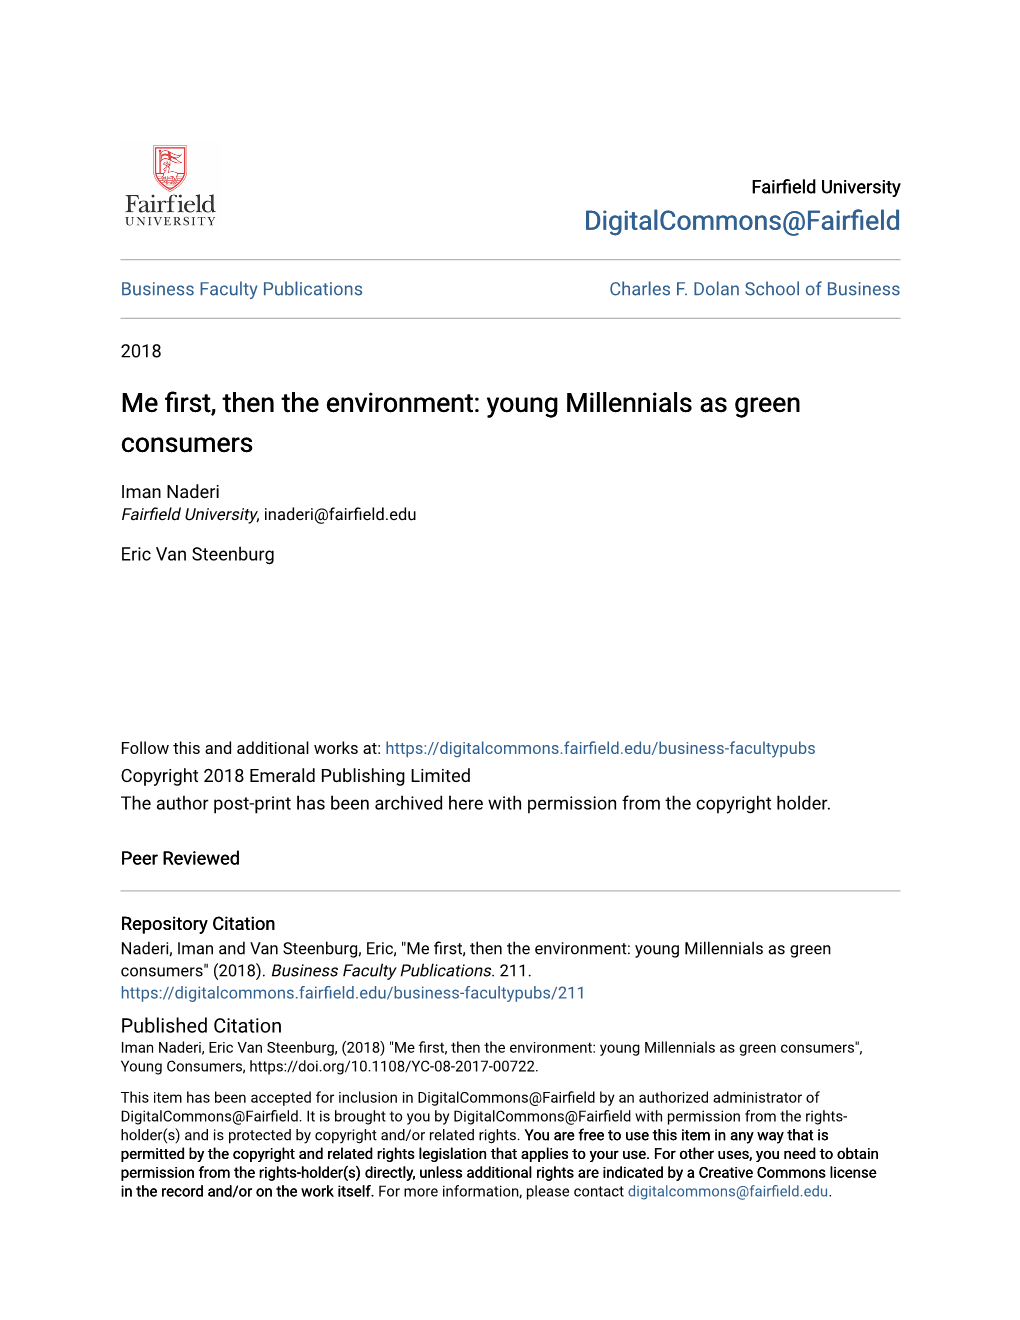 Young Millennials As Green Consumers